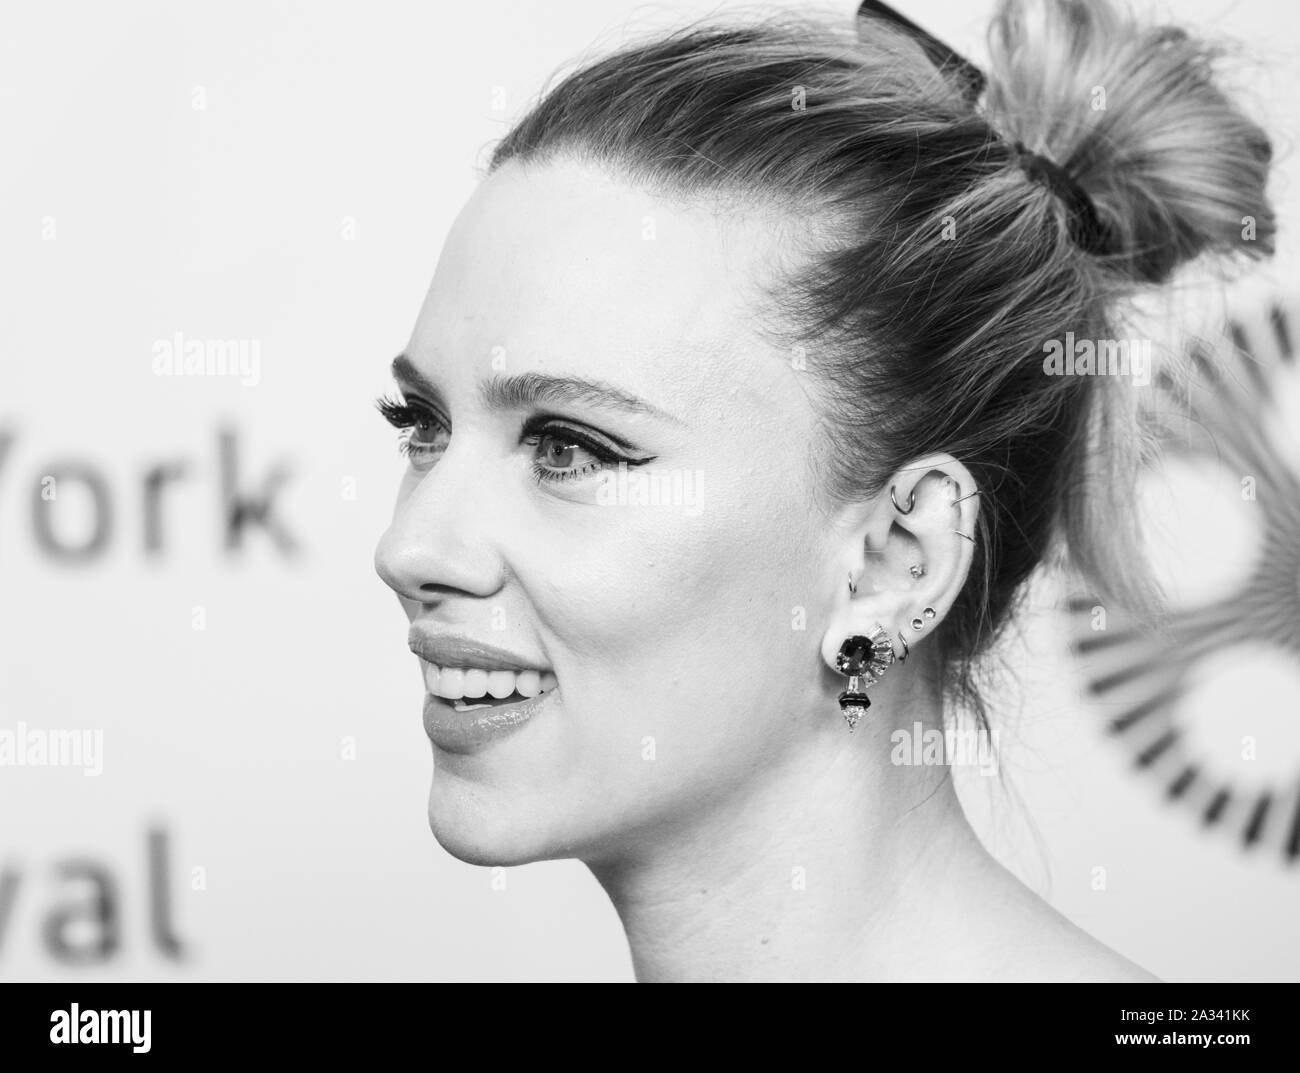 New York, NY - October 4, 2019: Scarlett Johansson wearing dress by Dior attends premiere of Marriga Story at 57th New York Film Festival at Lincoln Center Alice Tully Hall Stock Photo